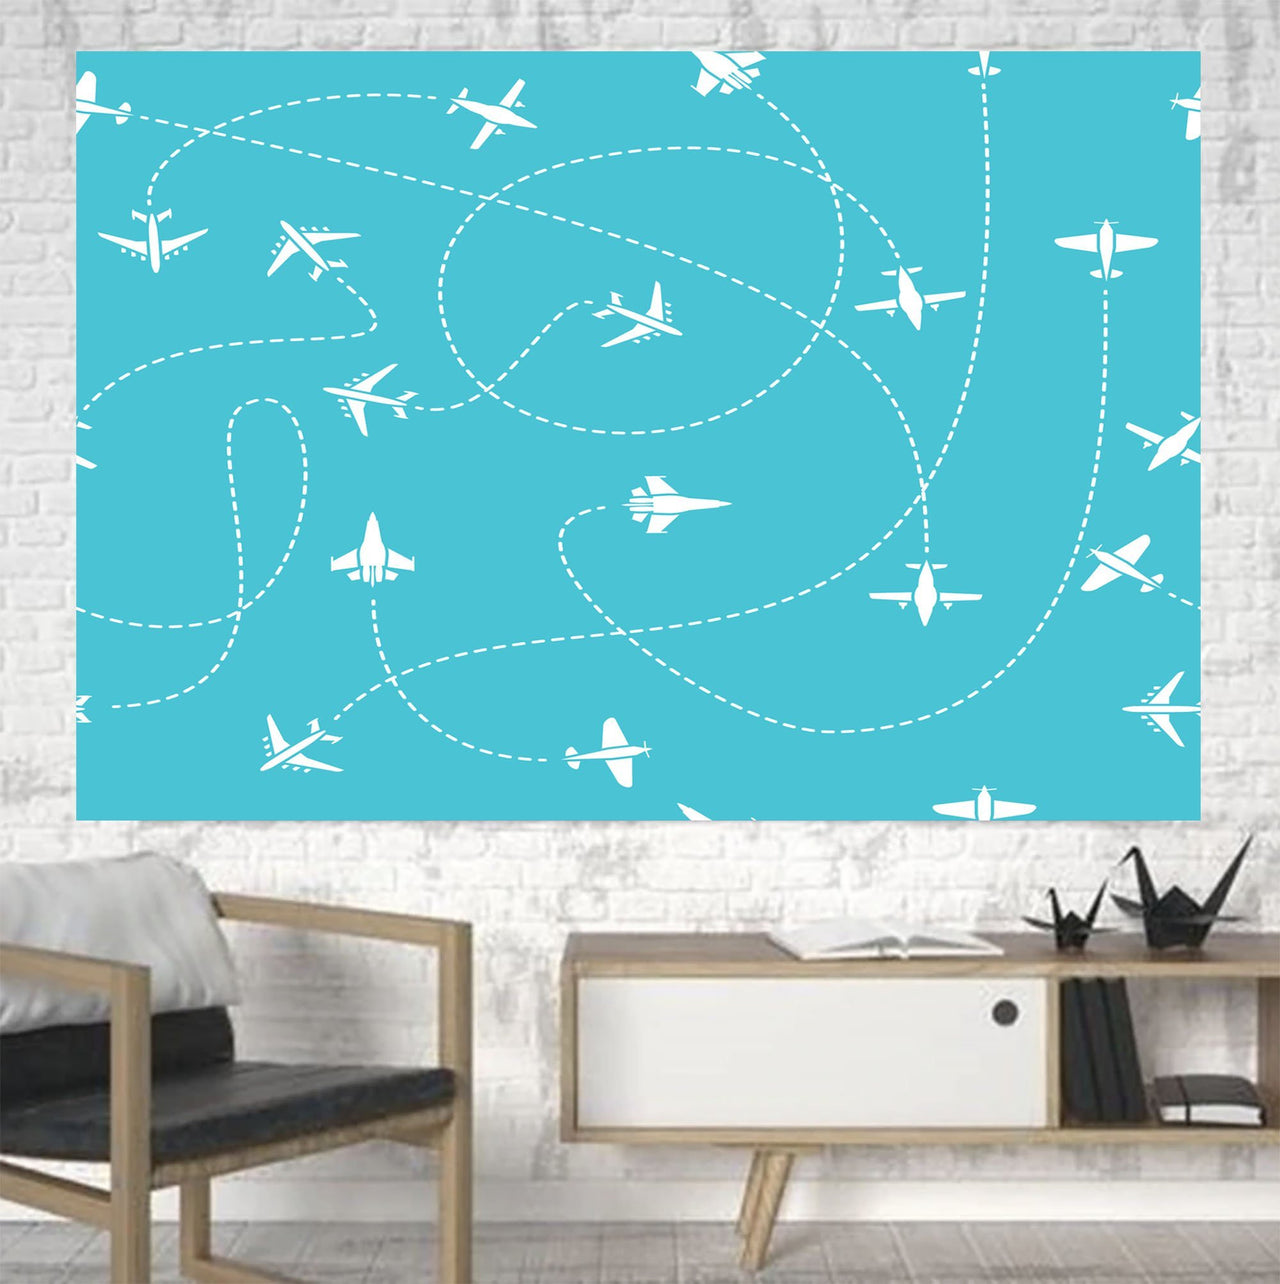 Travel The The World By Plane Printed Canvas Posters (1 Piece) Aviation Shop 